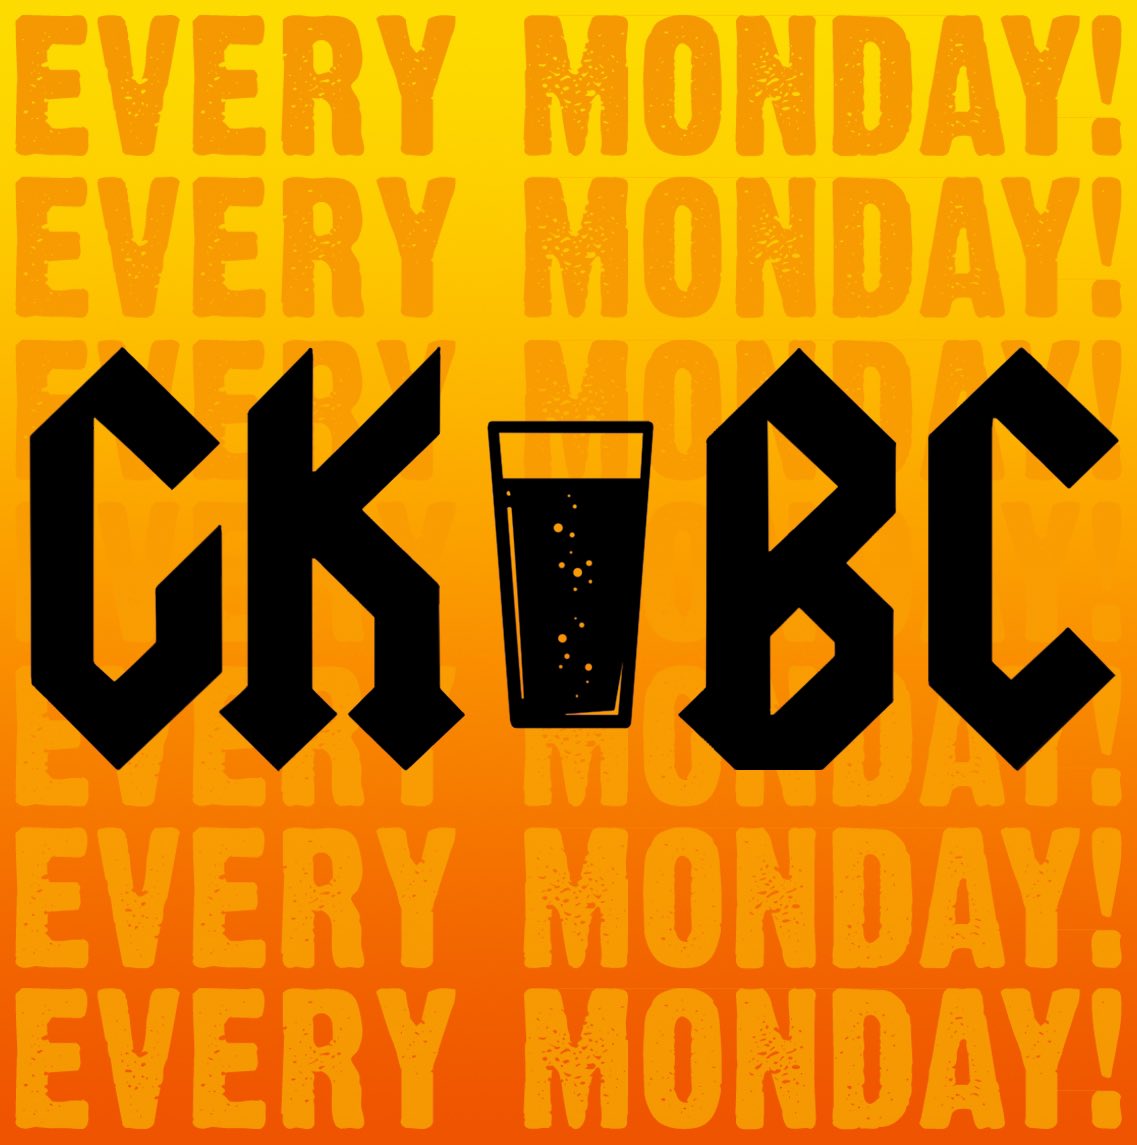 Just a reminder that MONDAYS are #BEERCLUB nights! 🍺GKBC Members get a 20% discount so start your week off right and be sure to pop by! Not a member yet? never too late to sign up and get that 💯🍻 #whosnext #georgekeeley #gknyc #beerisgood #drinkamongstfriends #drinkrealbeer